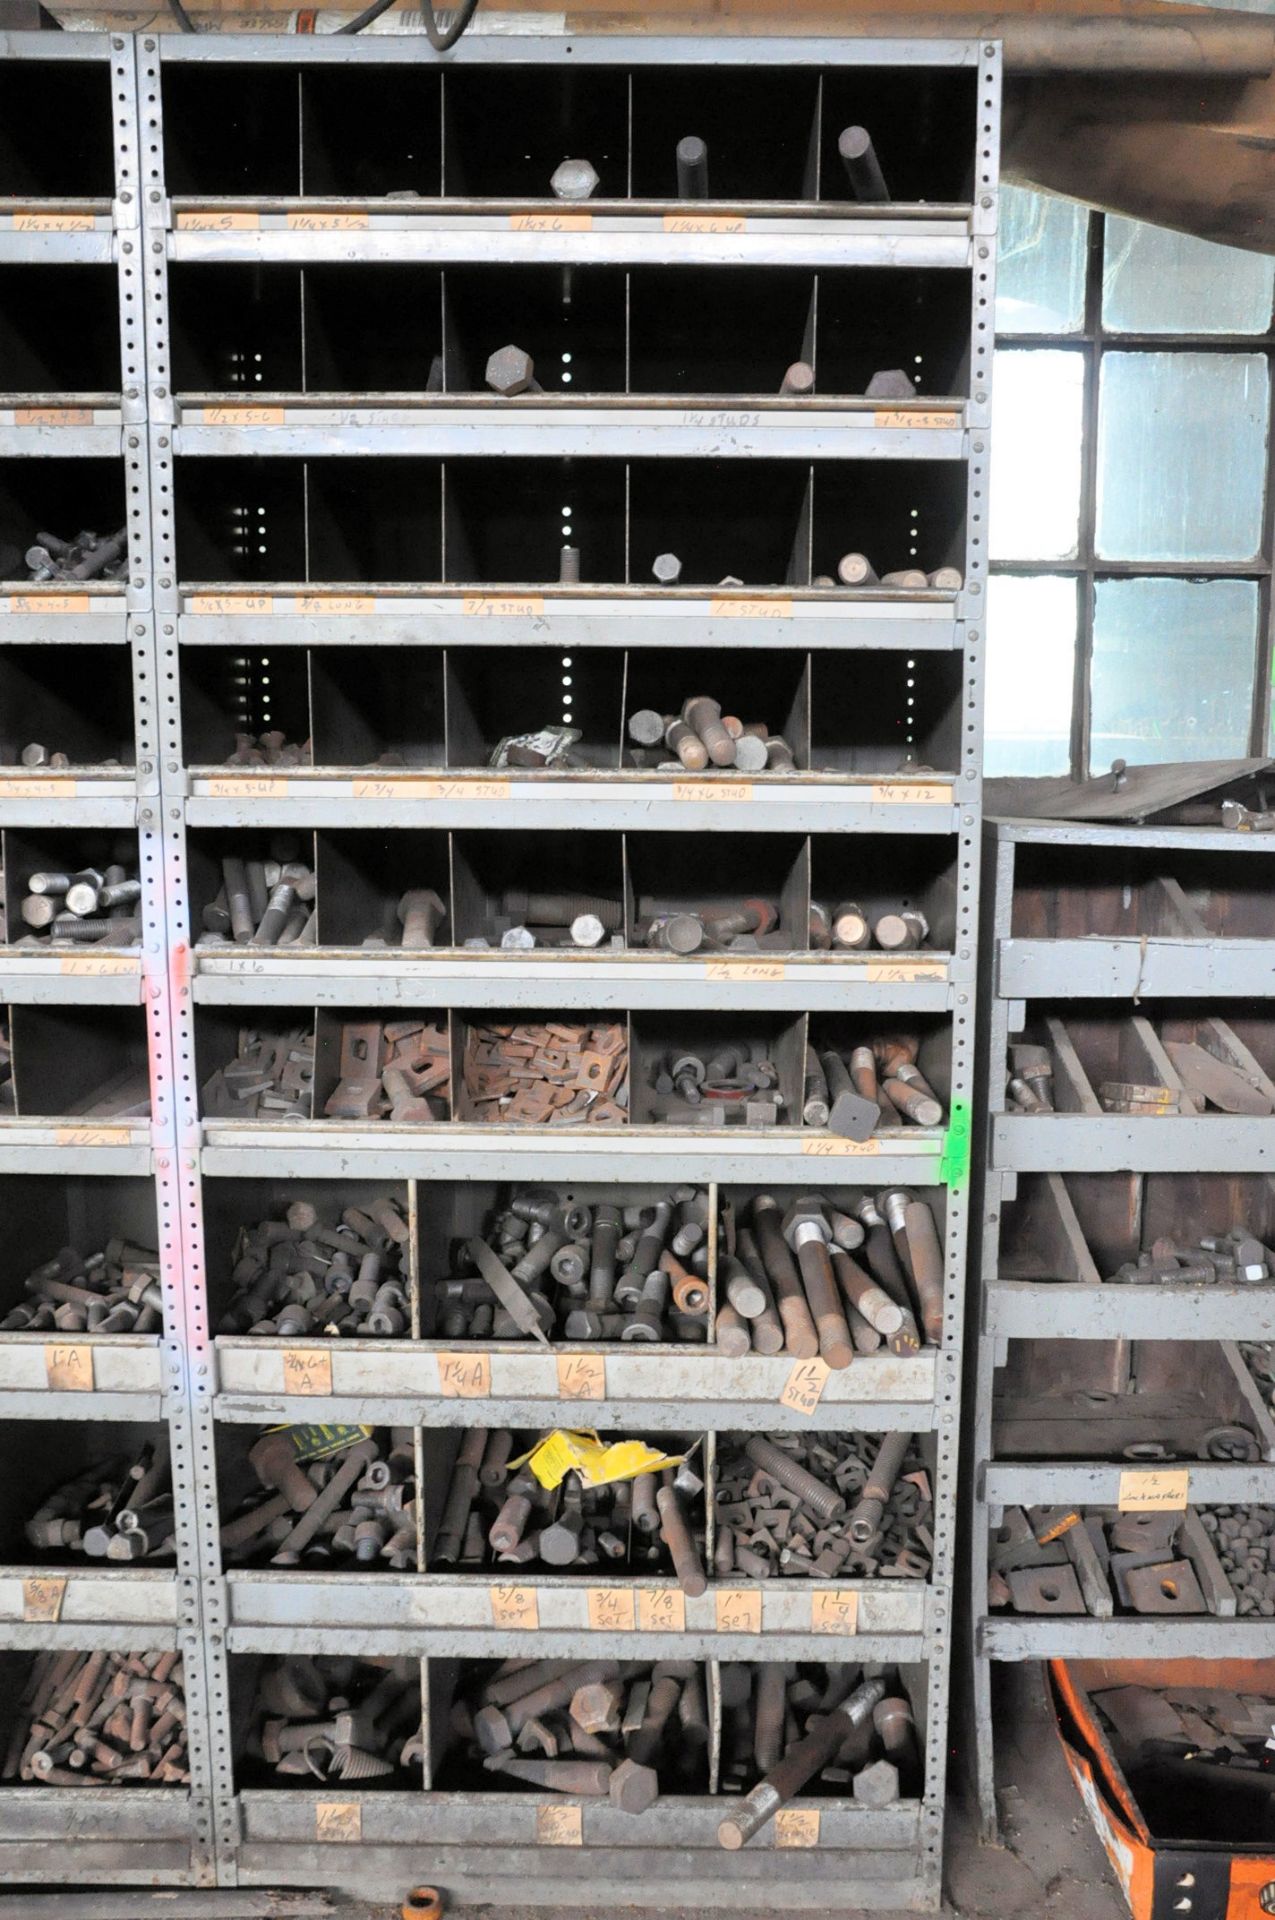 Lot-bolts, Nuts, Washers, etc. with Shelving Units - Image 4 of 7